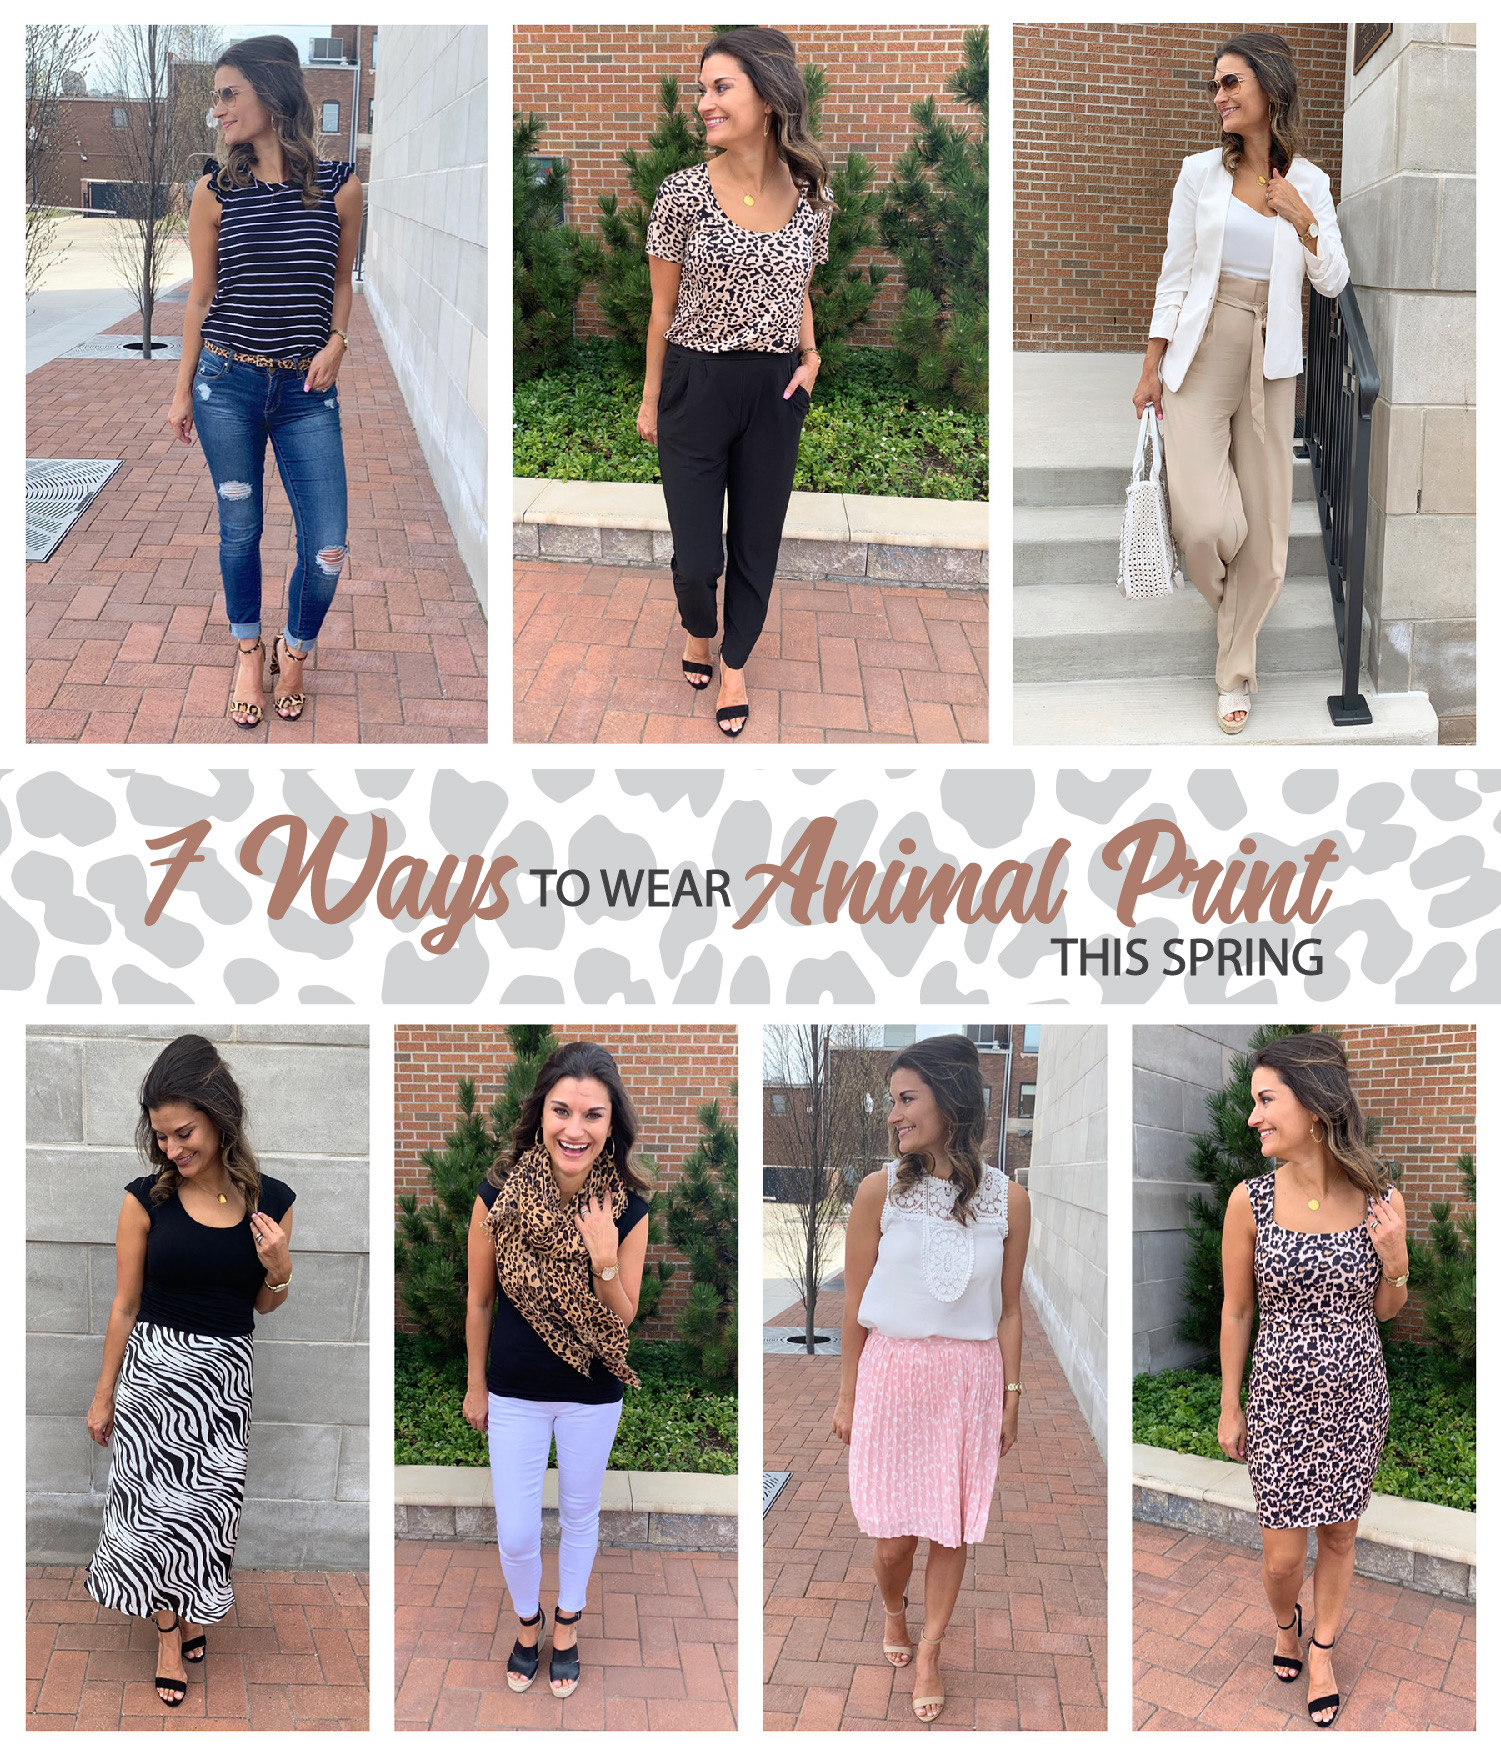 7 Ways to Wear Animal Print This Spring – Just Posted